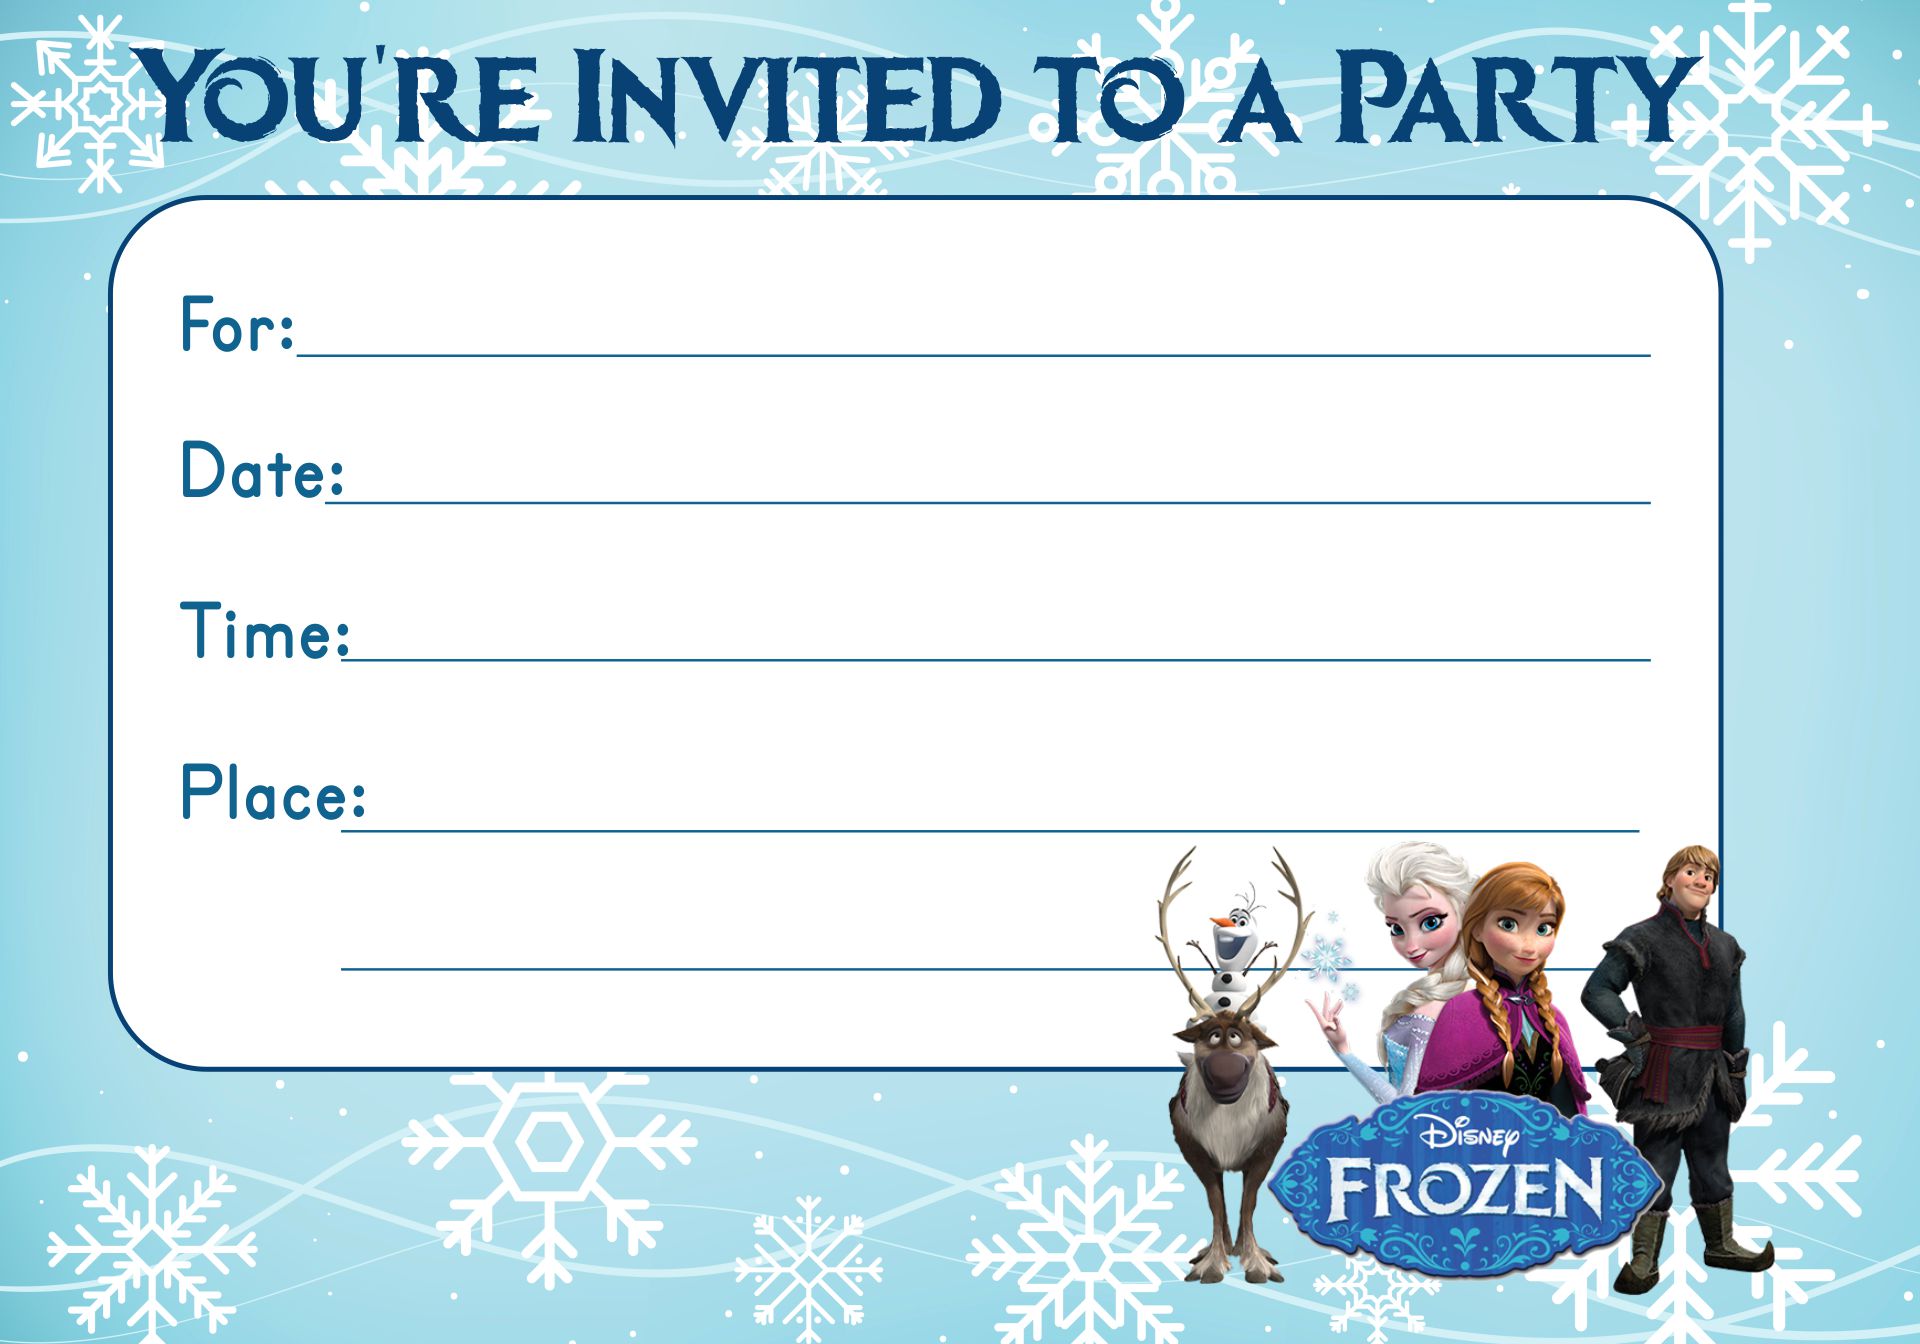 9-best-images-of-frozen-birthday-invitations-editable-printable-frozen-printable-editable